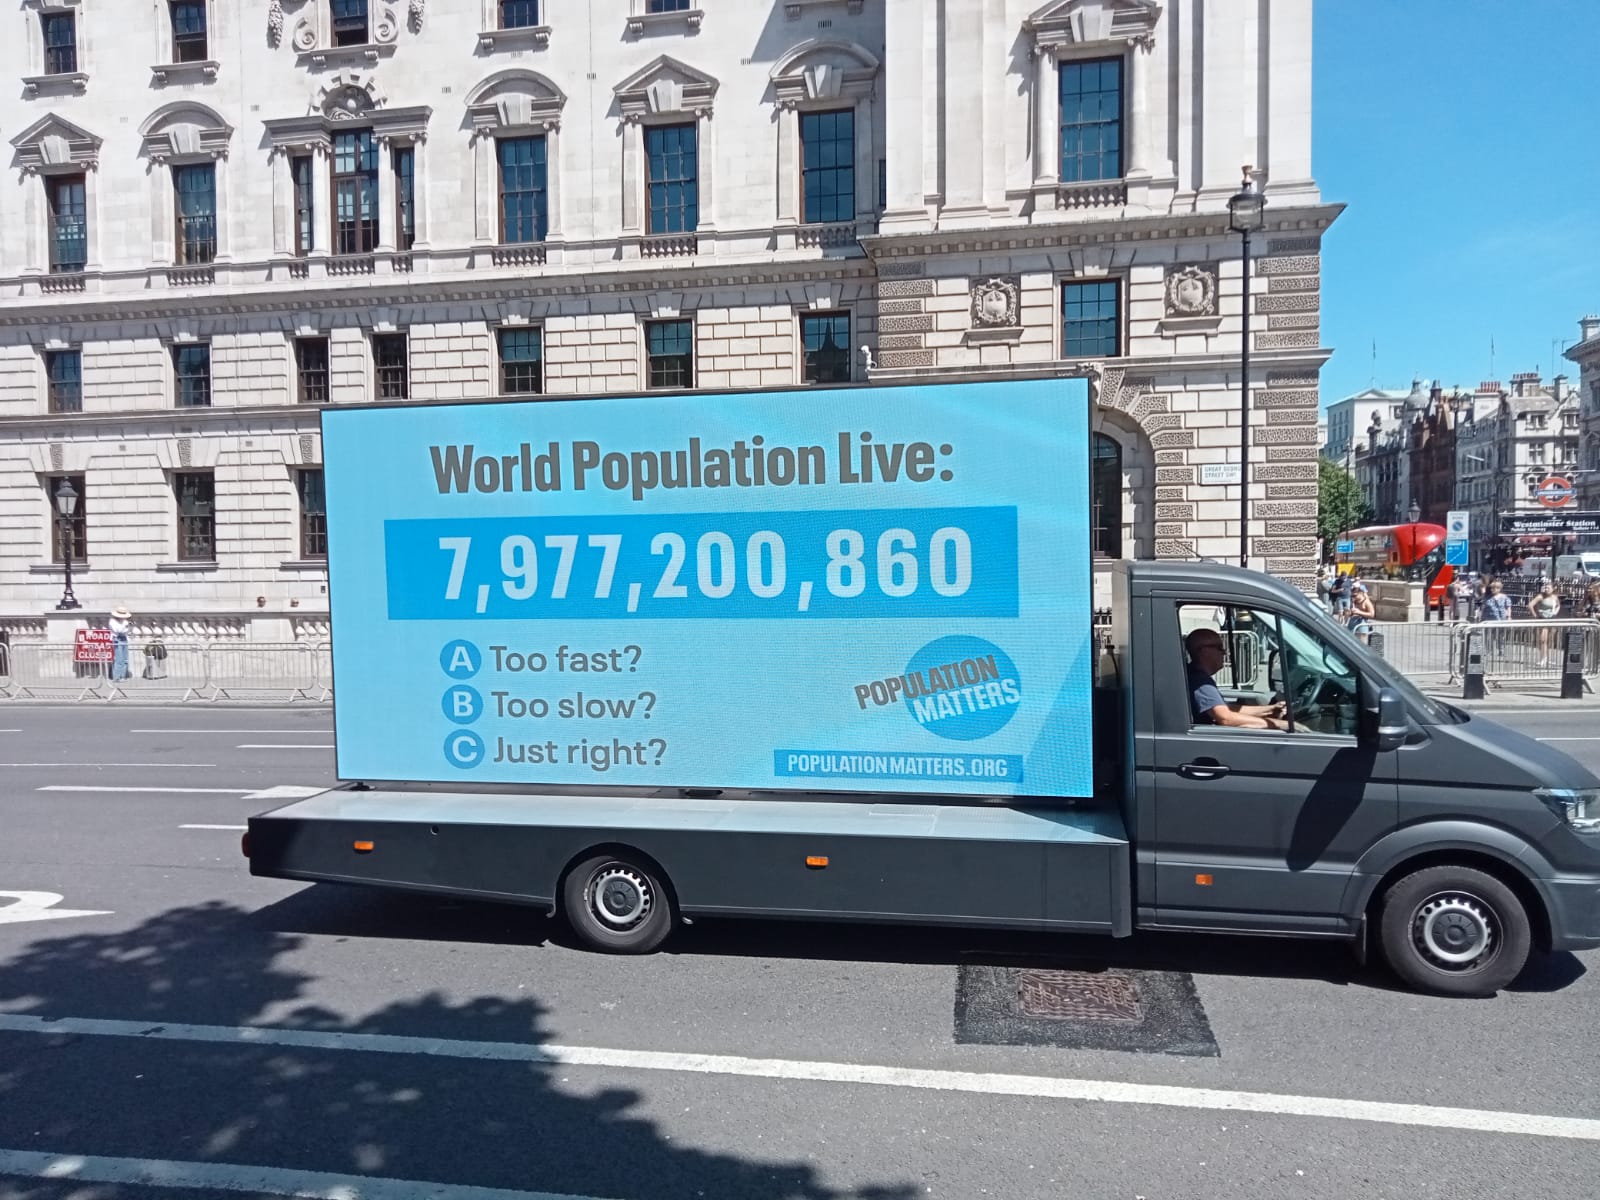 Our live population counter in London on World Population Day 2022